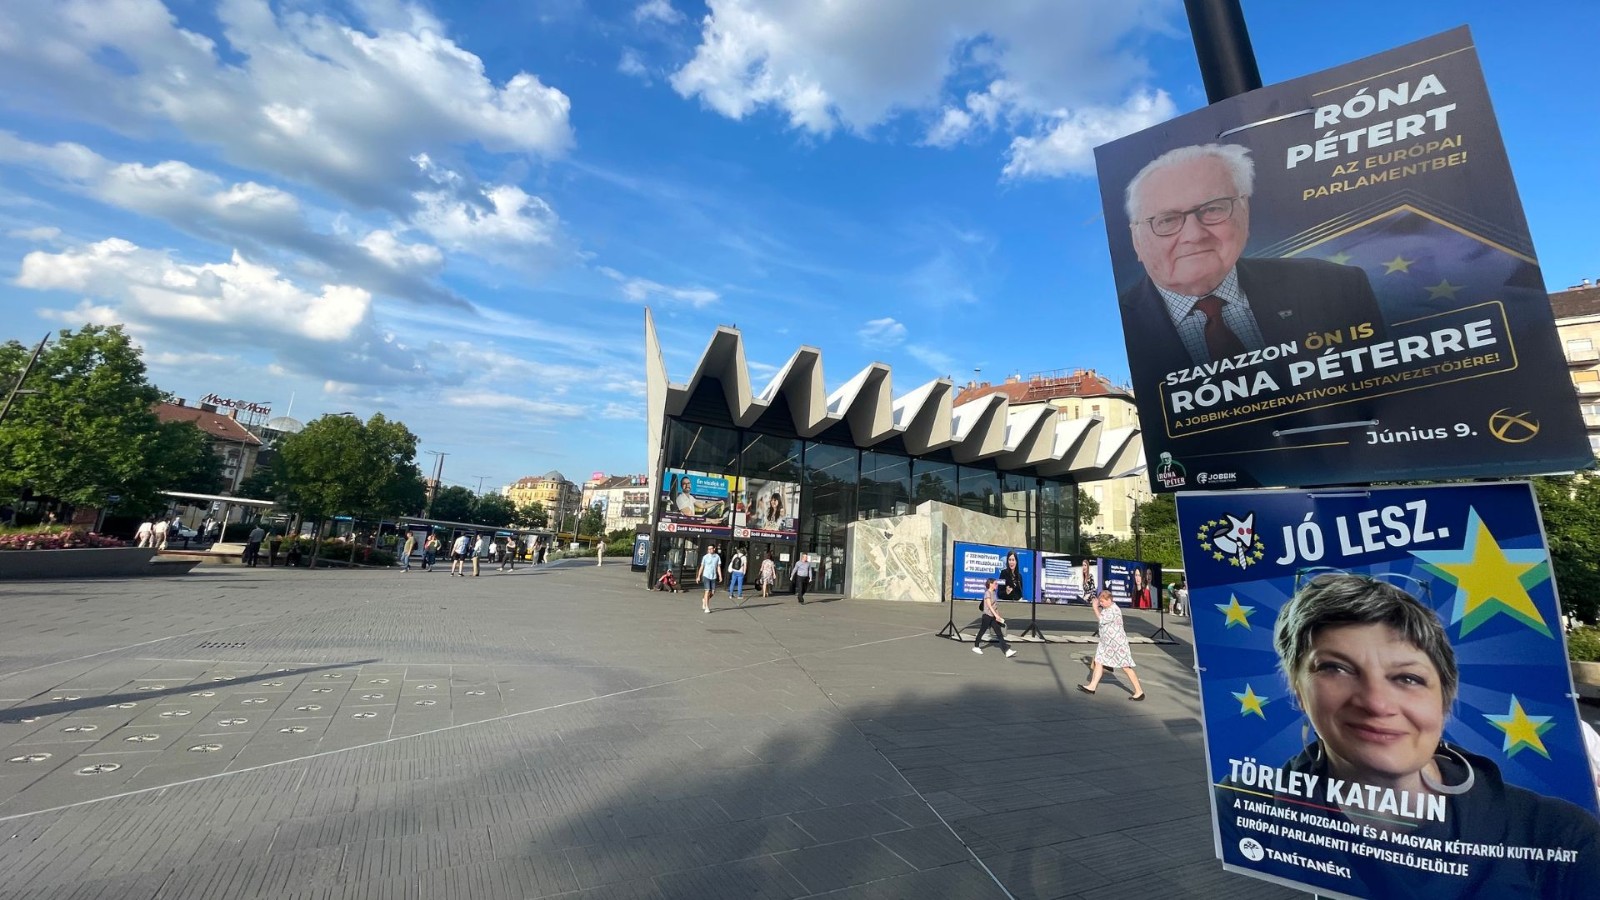 Posters of election candidates are everywhere in Budapest. /CGTN